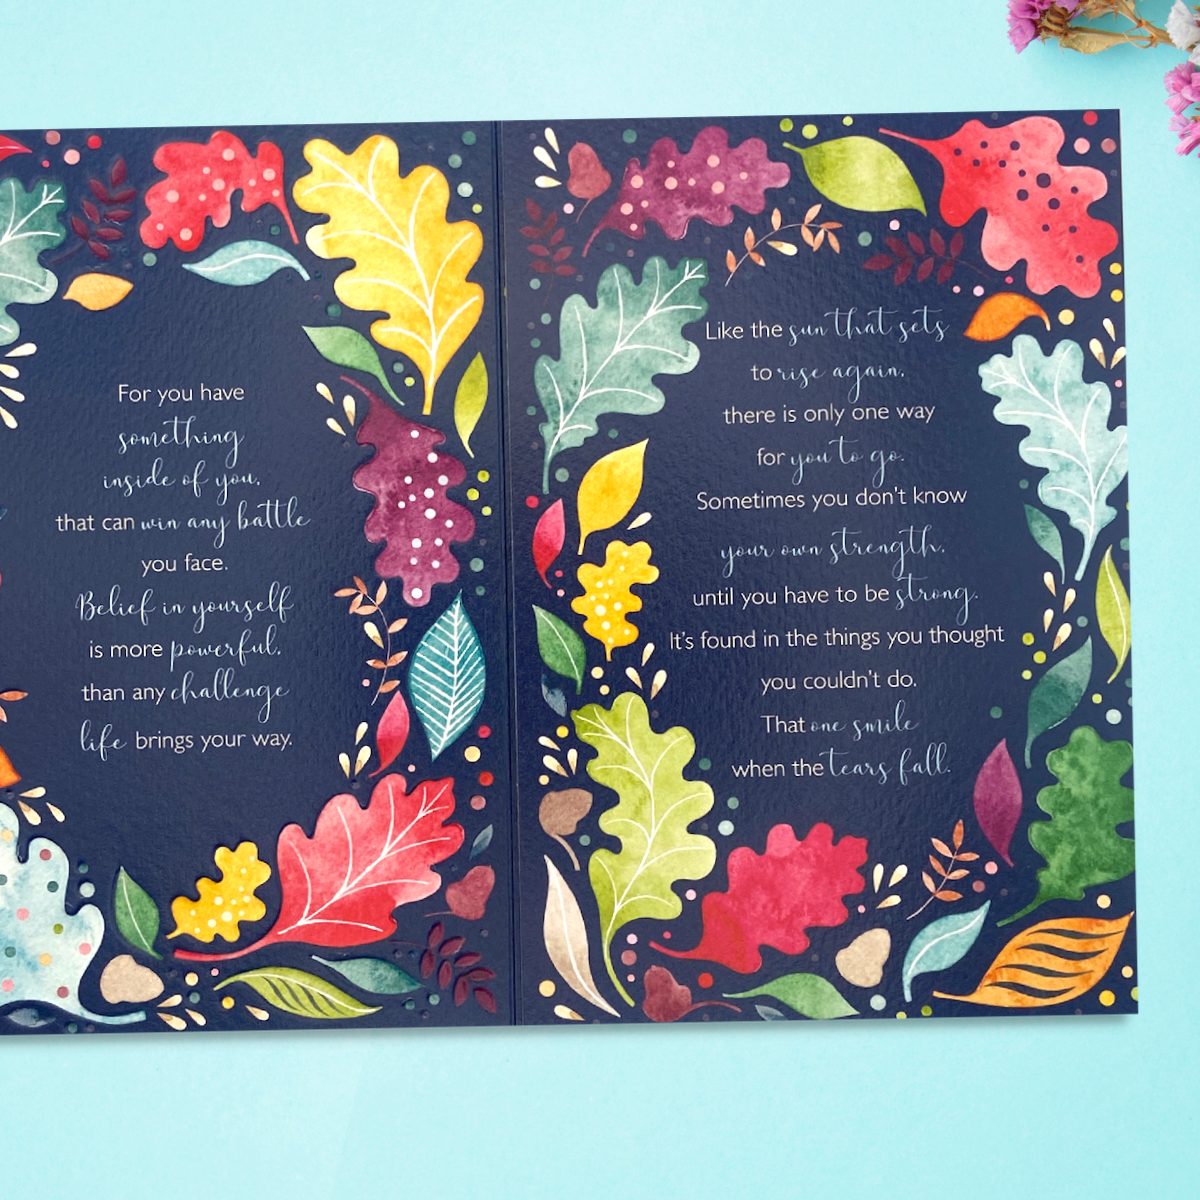 Two inside images with navy background and leaves with verse